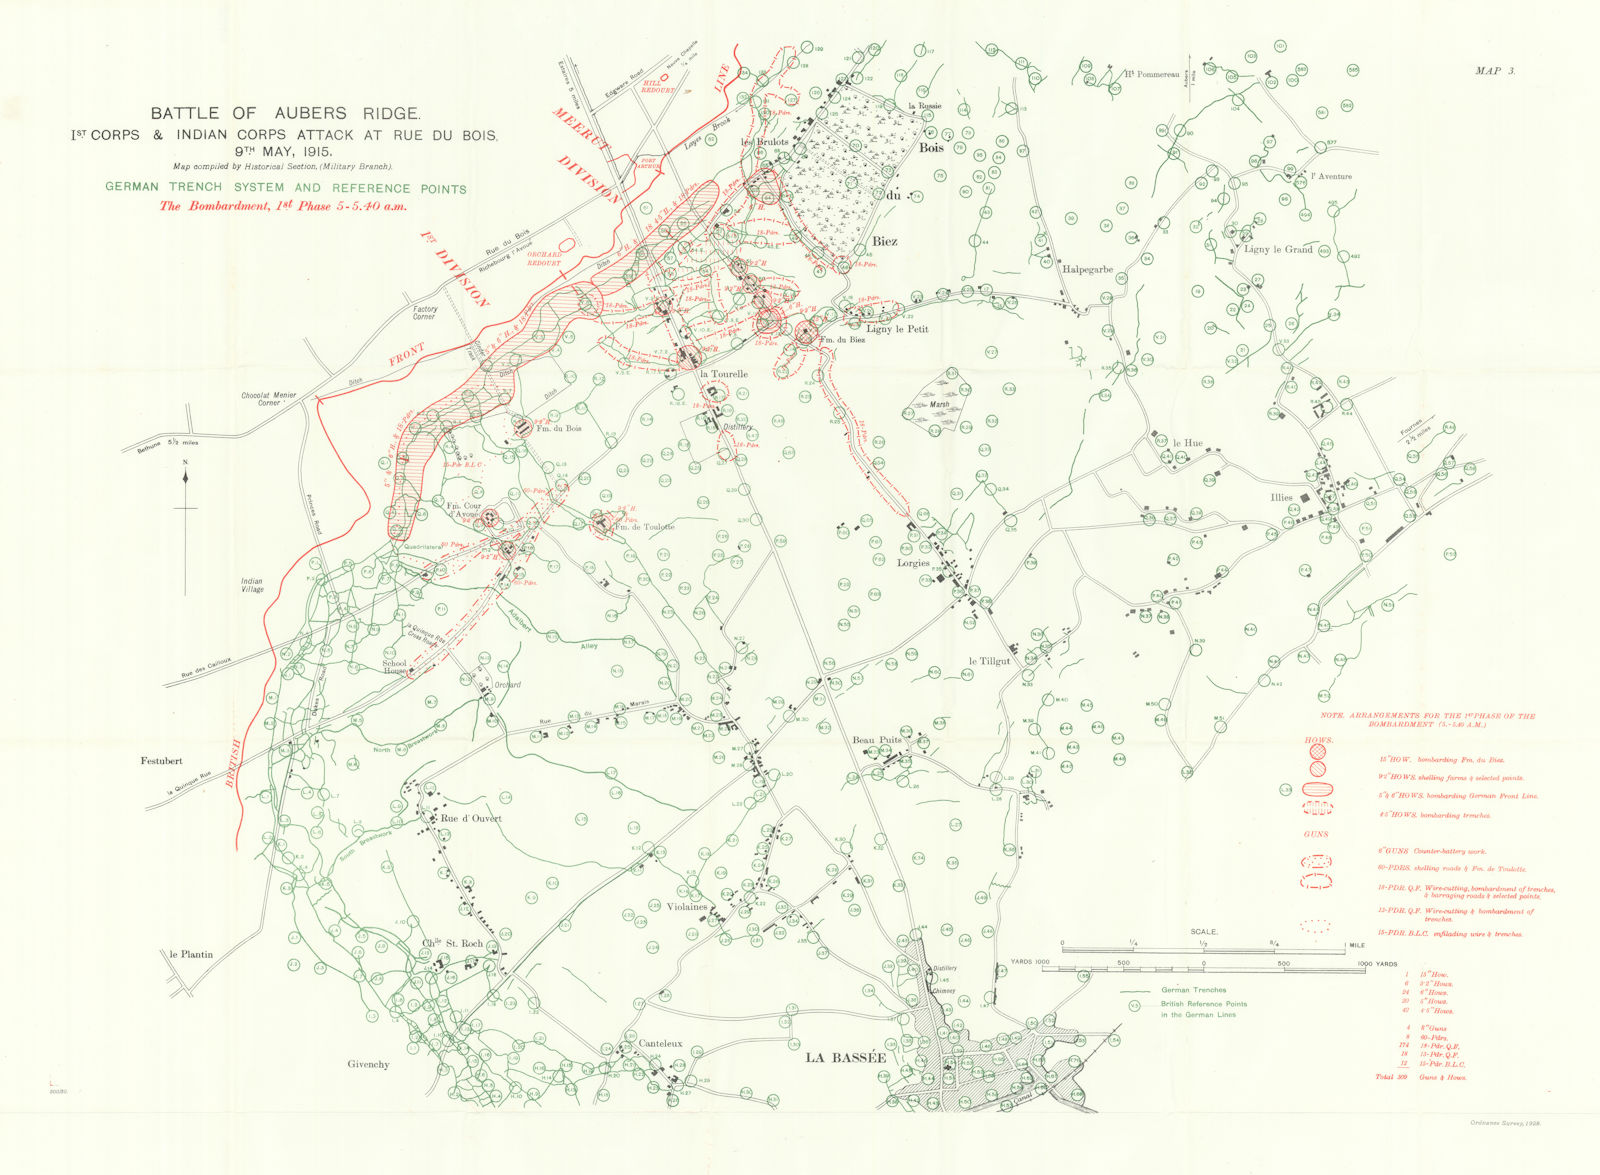 Associate Product Battle of Aubers Ridge 9th May 1915 1st & Indian Corps. German Trenches 1927 map